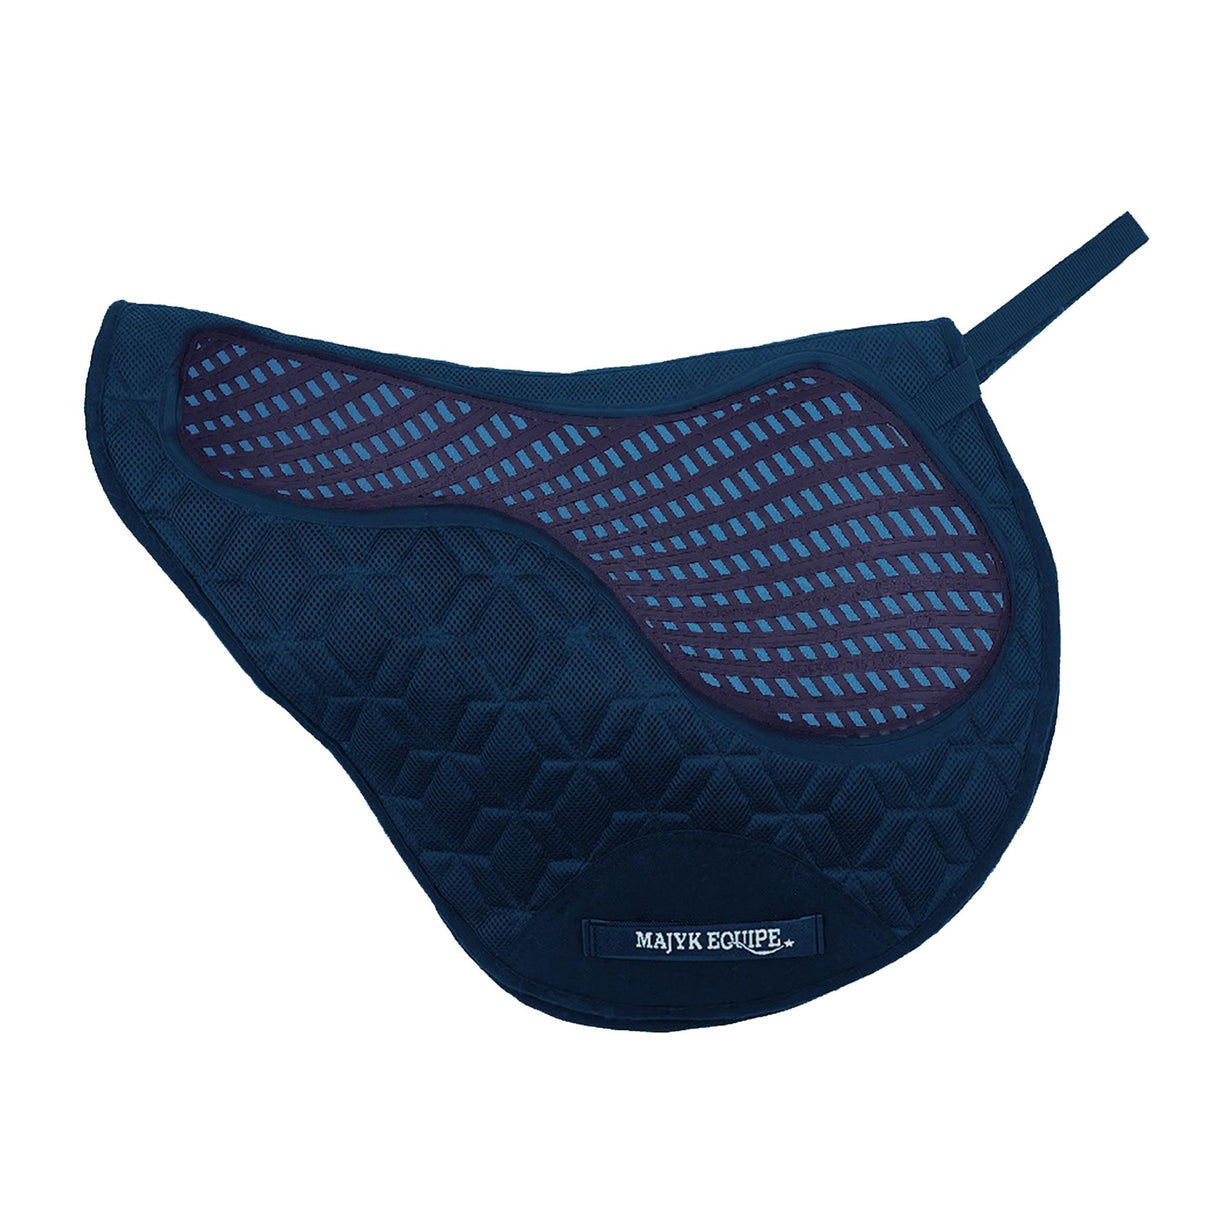 Majyk Equipe XC Pad Non Slip Cool Mesh with Impact Protection Navy